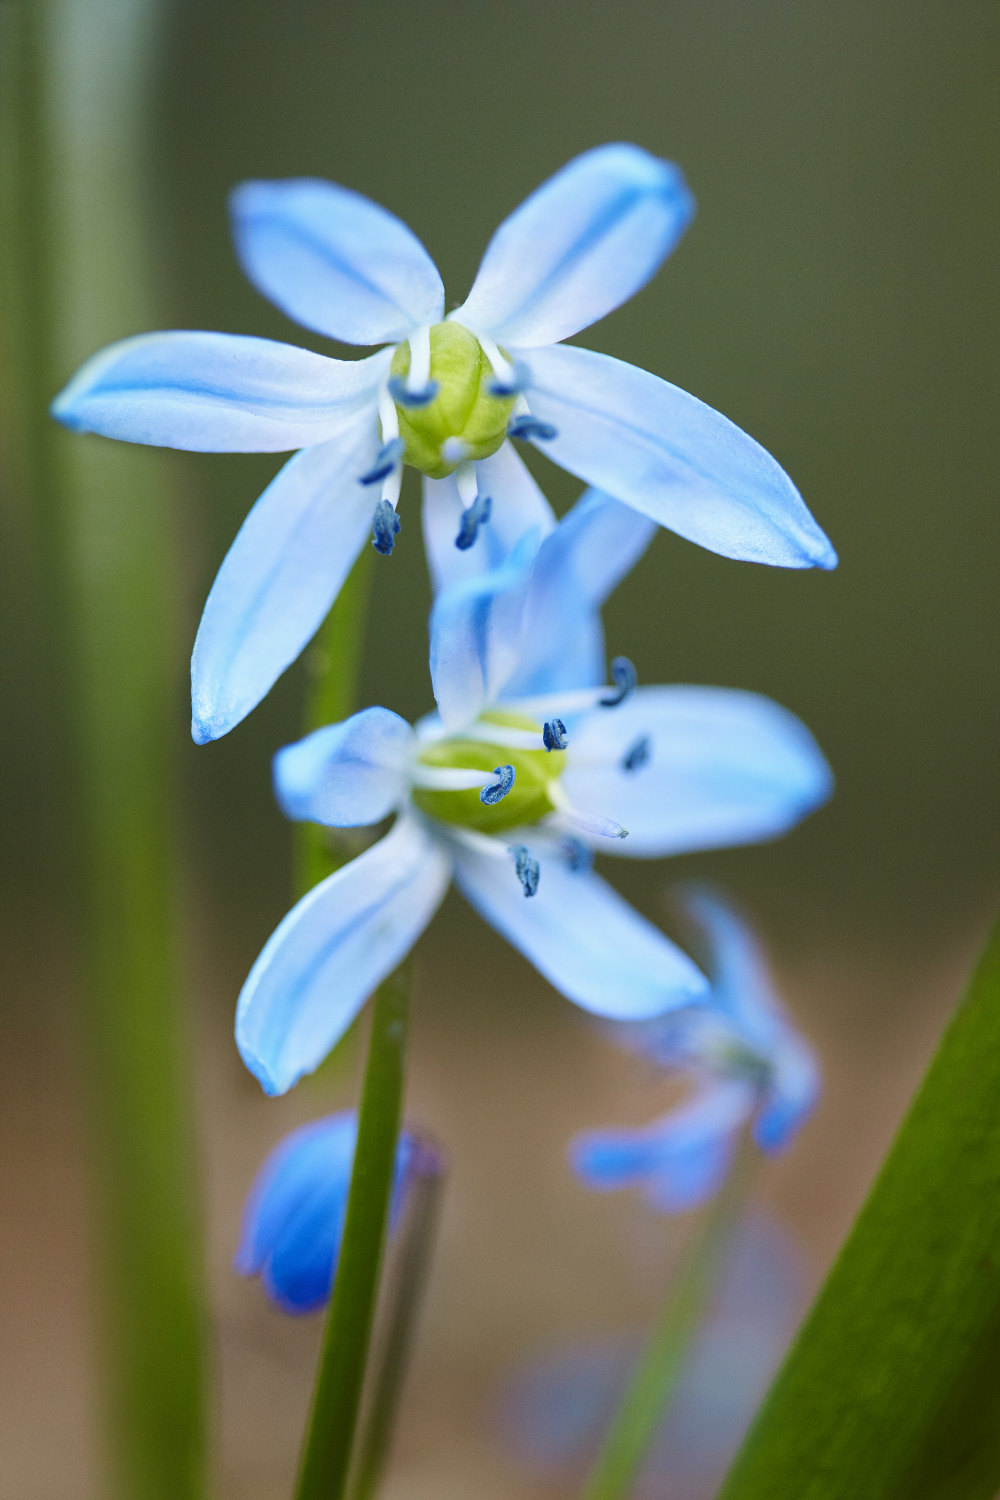 closeup of powder blue flowers with 6 long petals and plump green ovaries